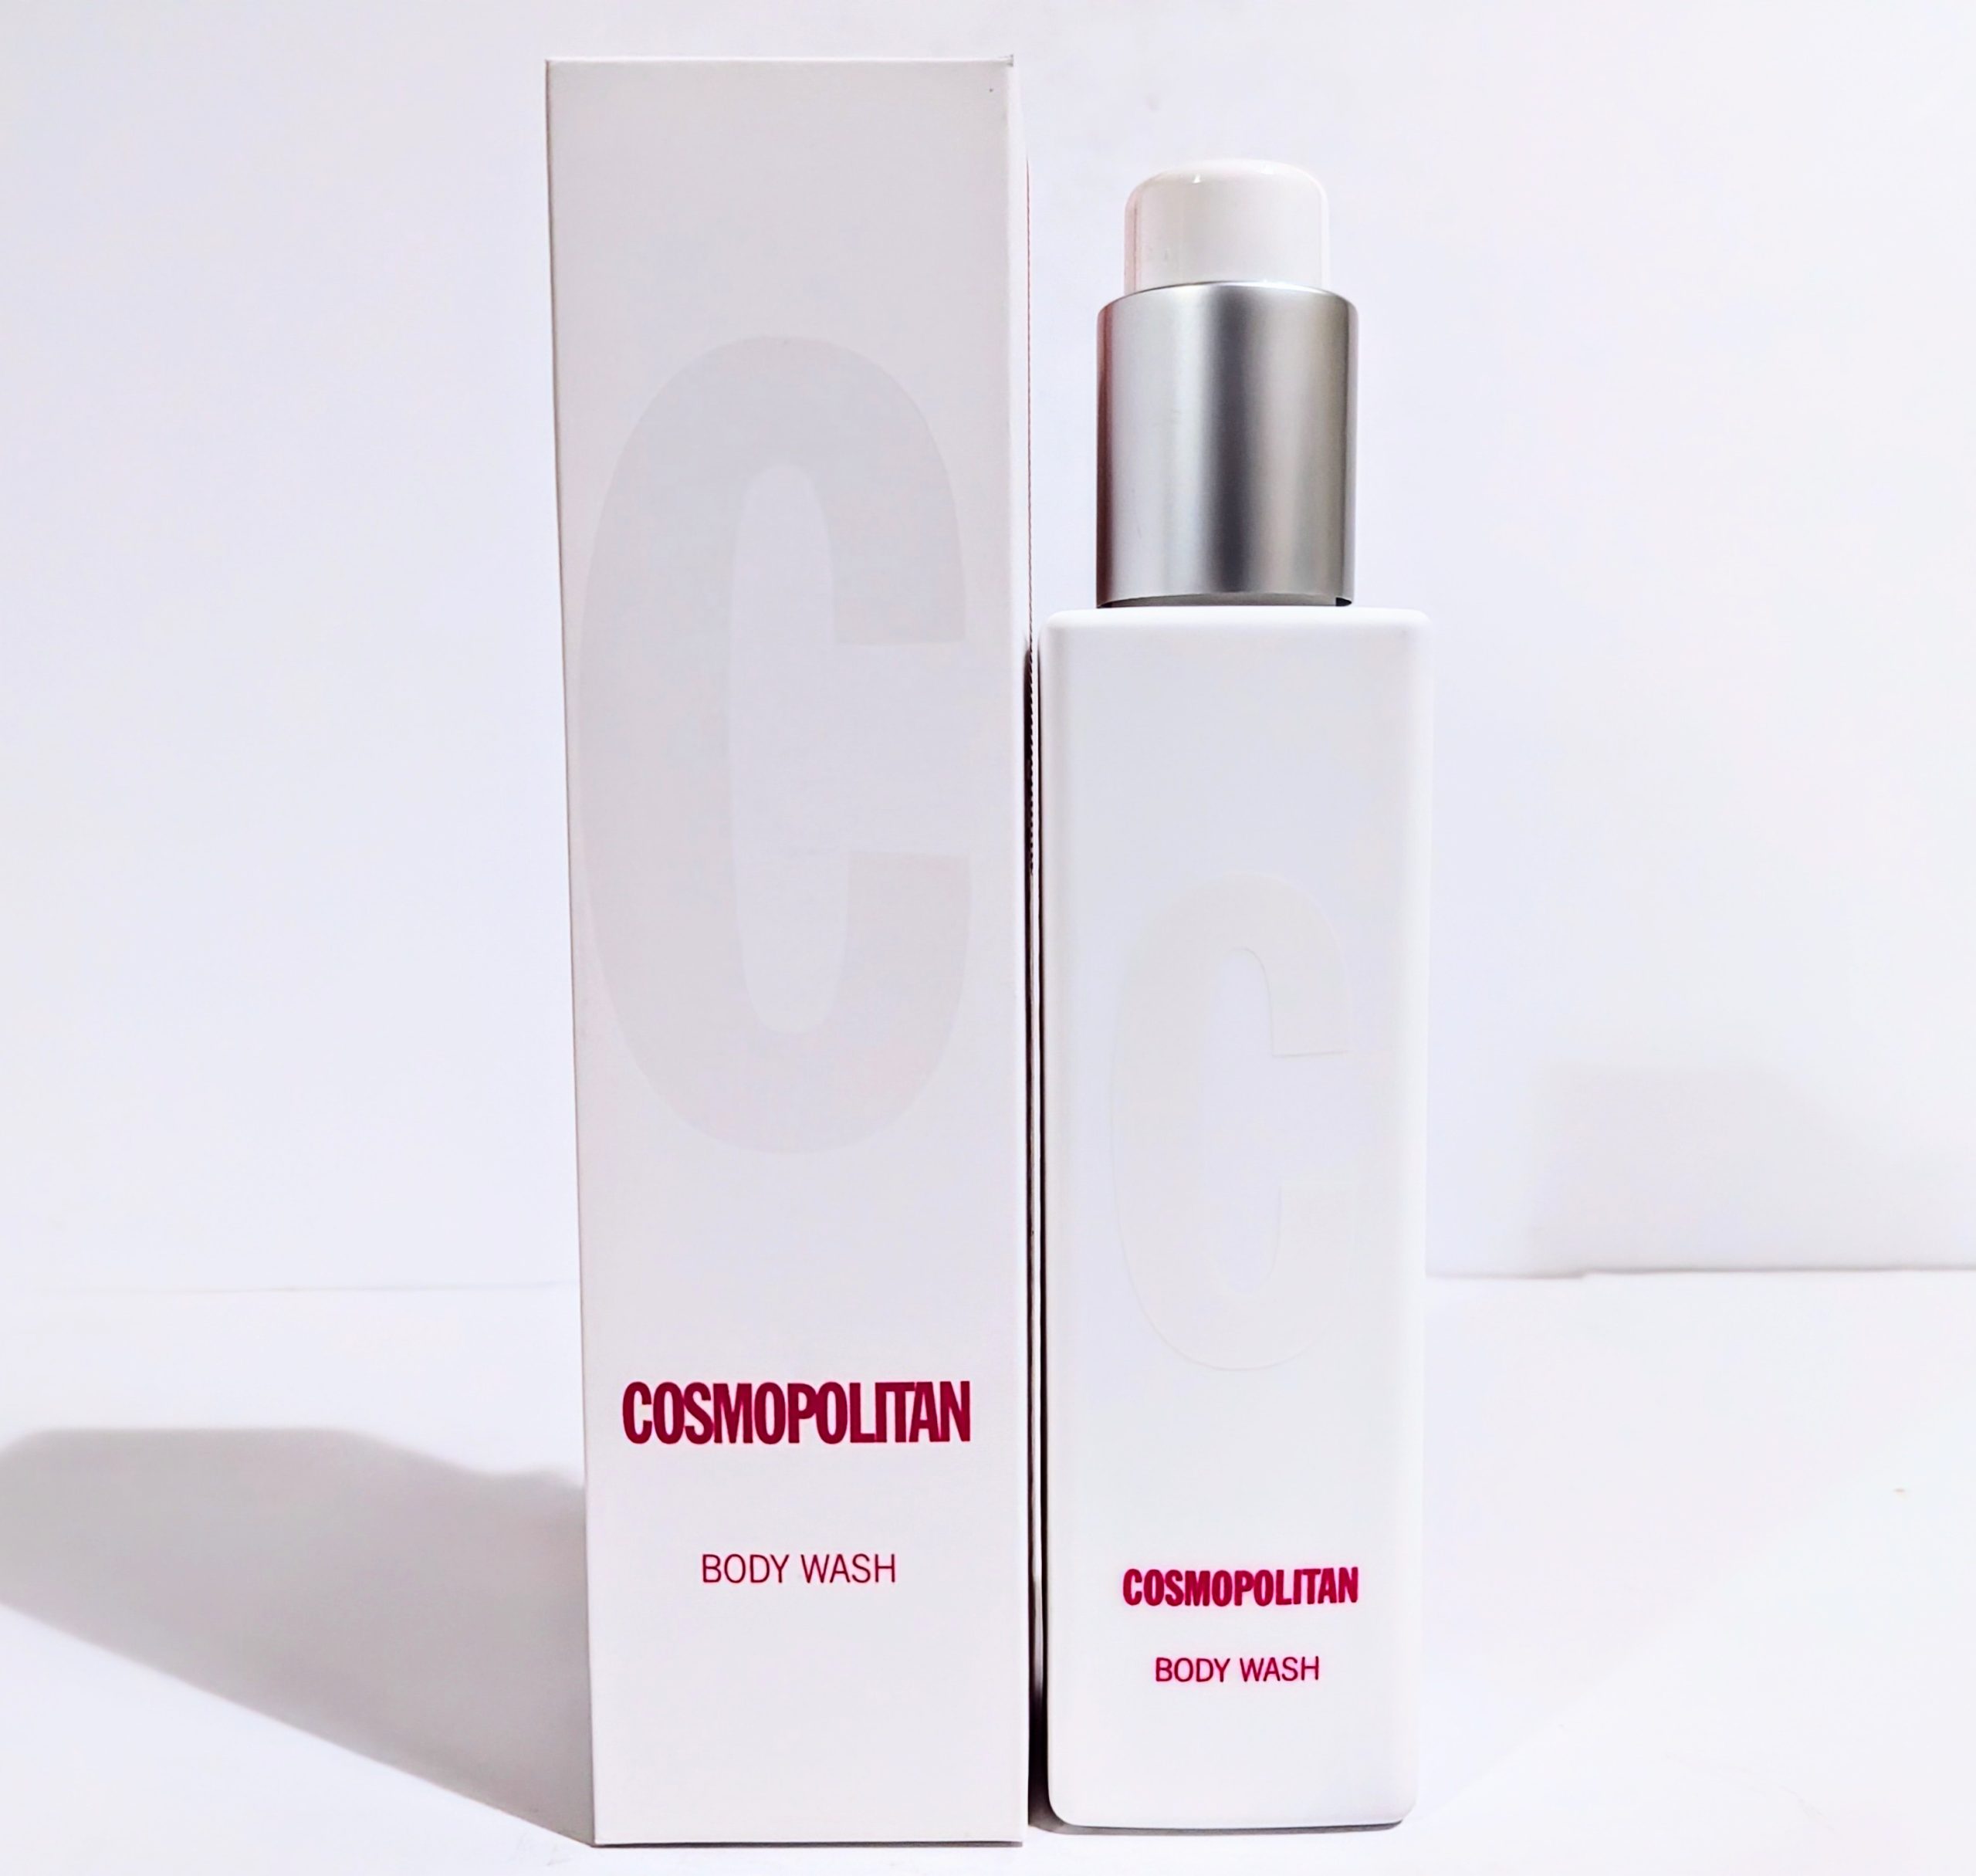 A white bottle of Cosmopolitan body wash with a metallic cap is placed beside its box, which also bears the brand name and logo.